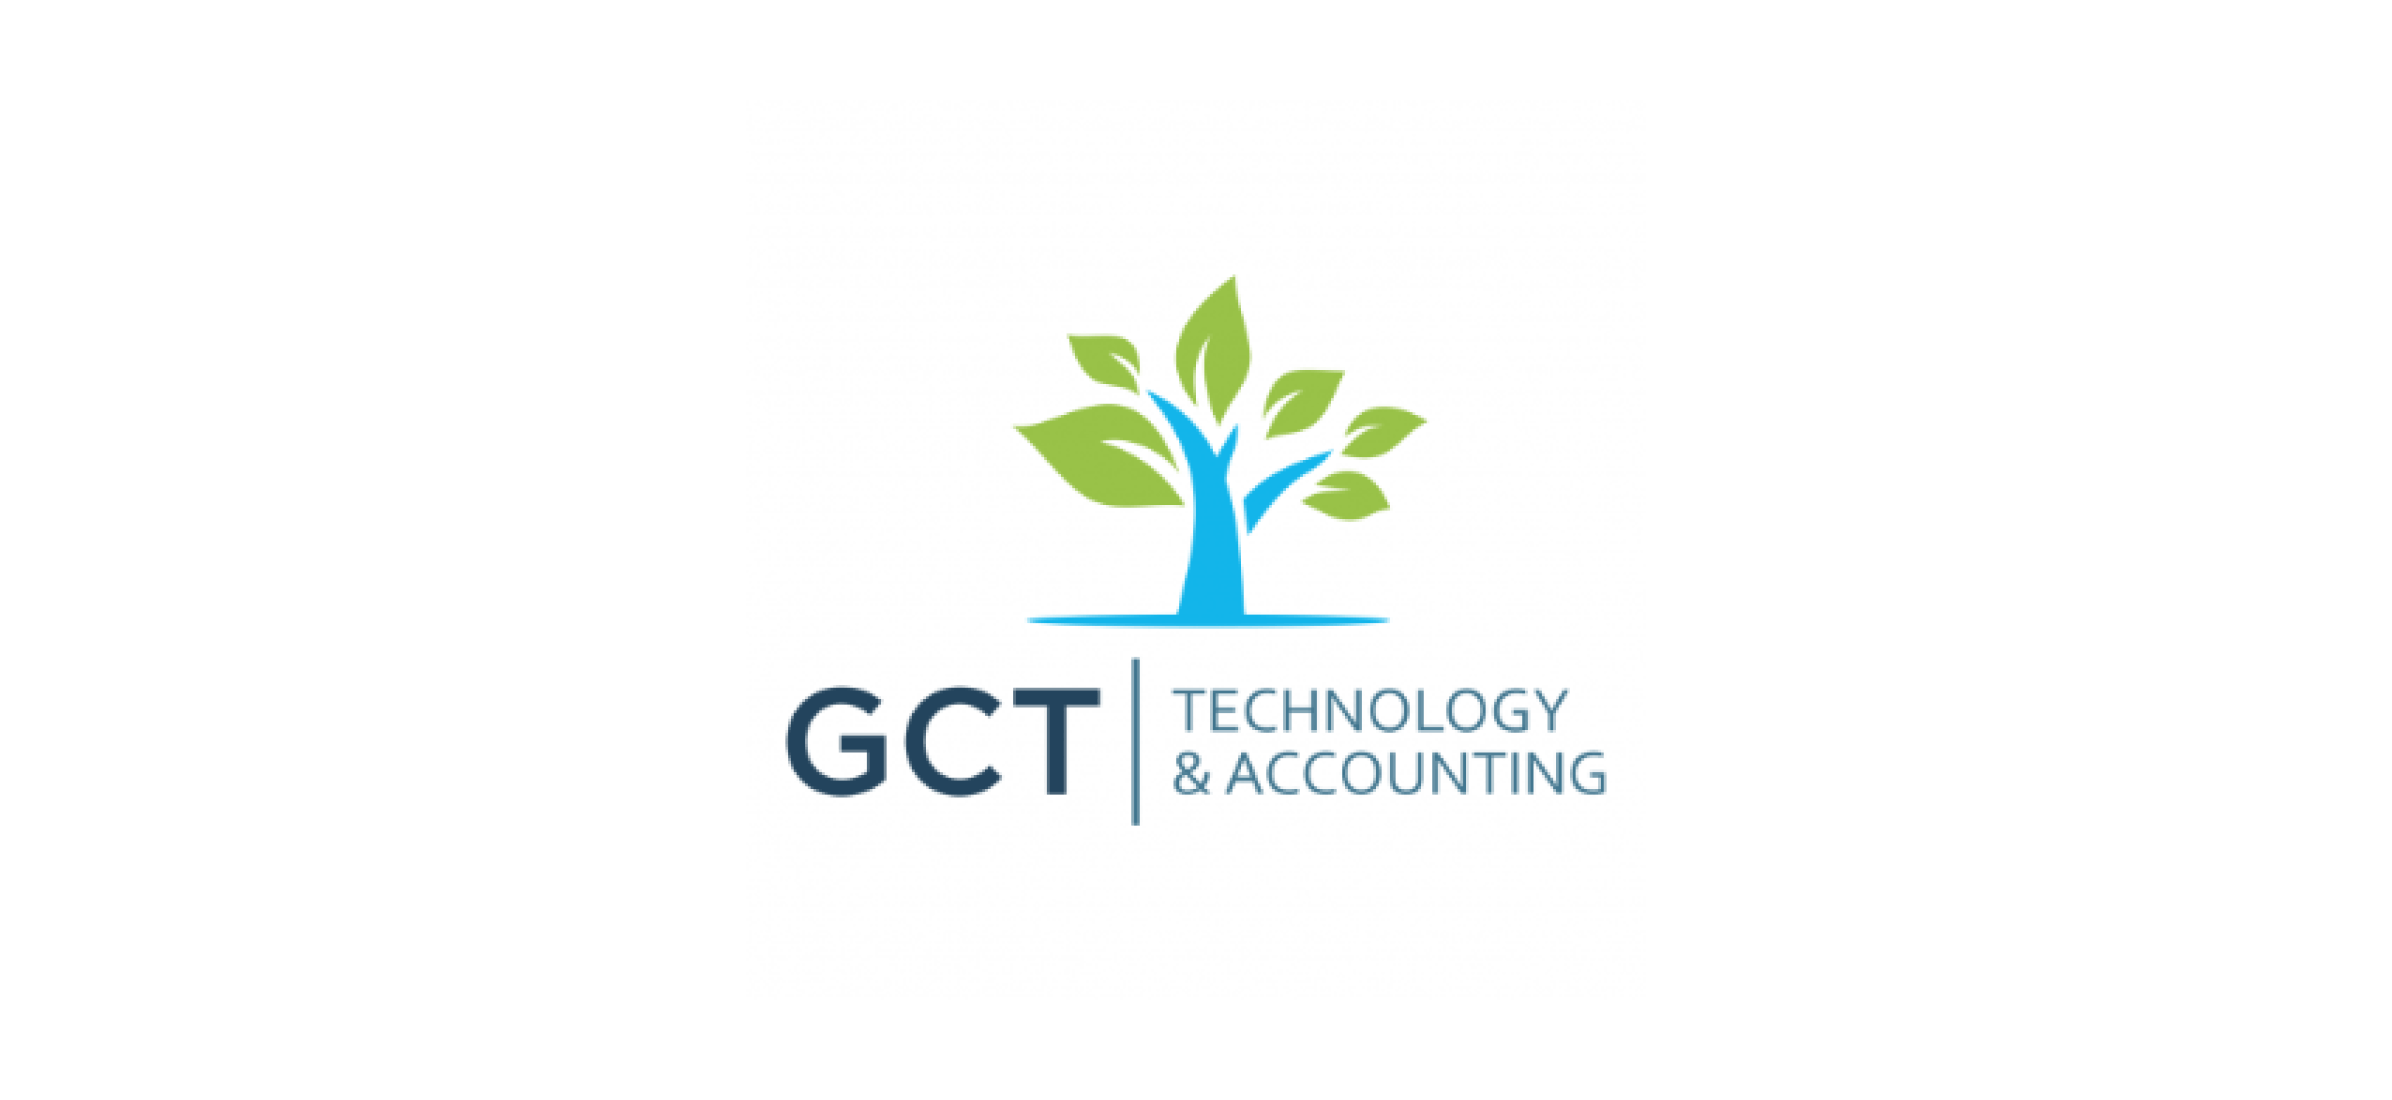 The GCT Technology & Accounting logo